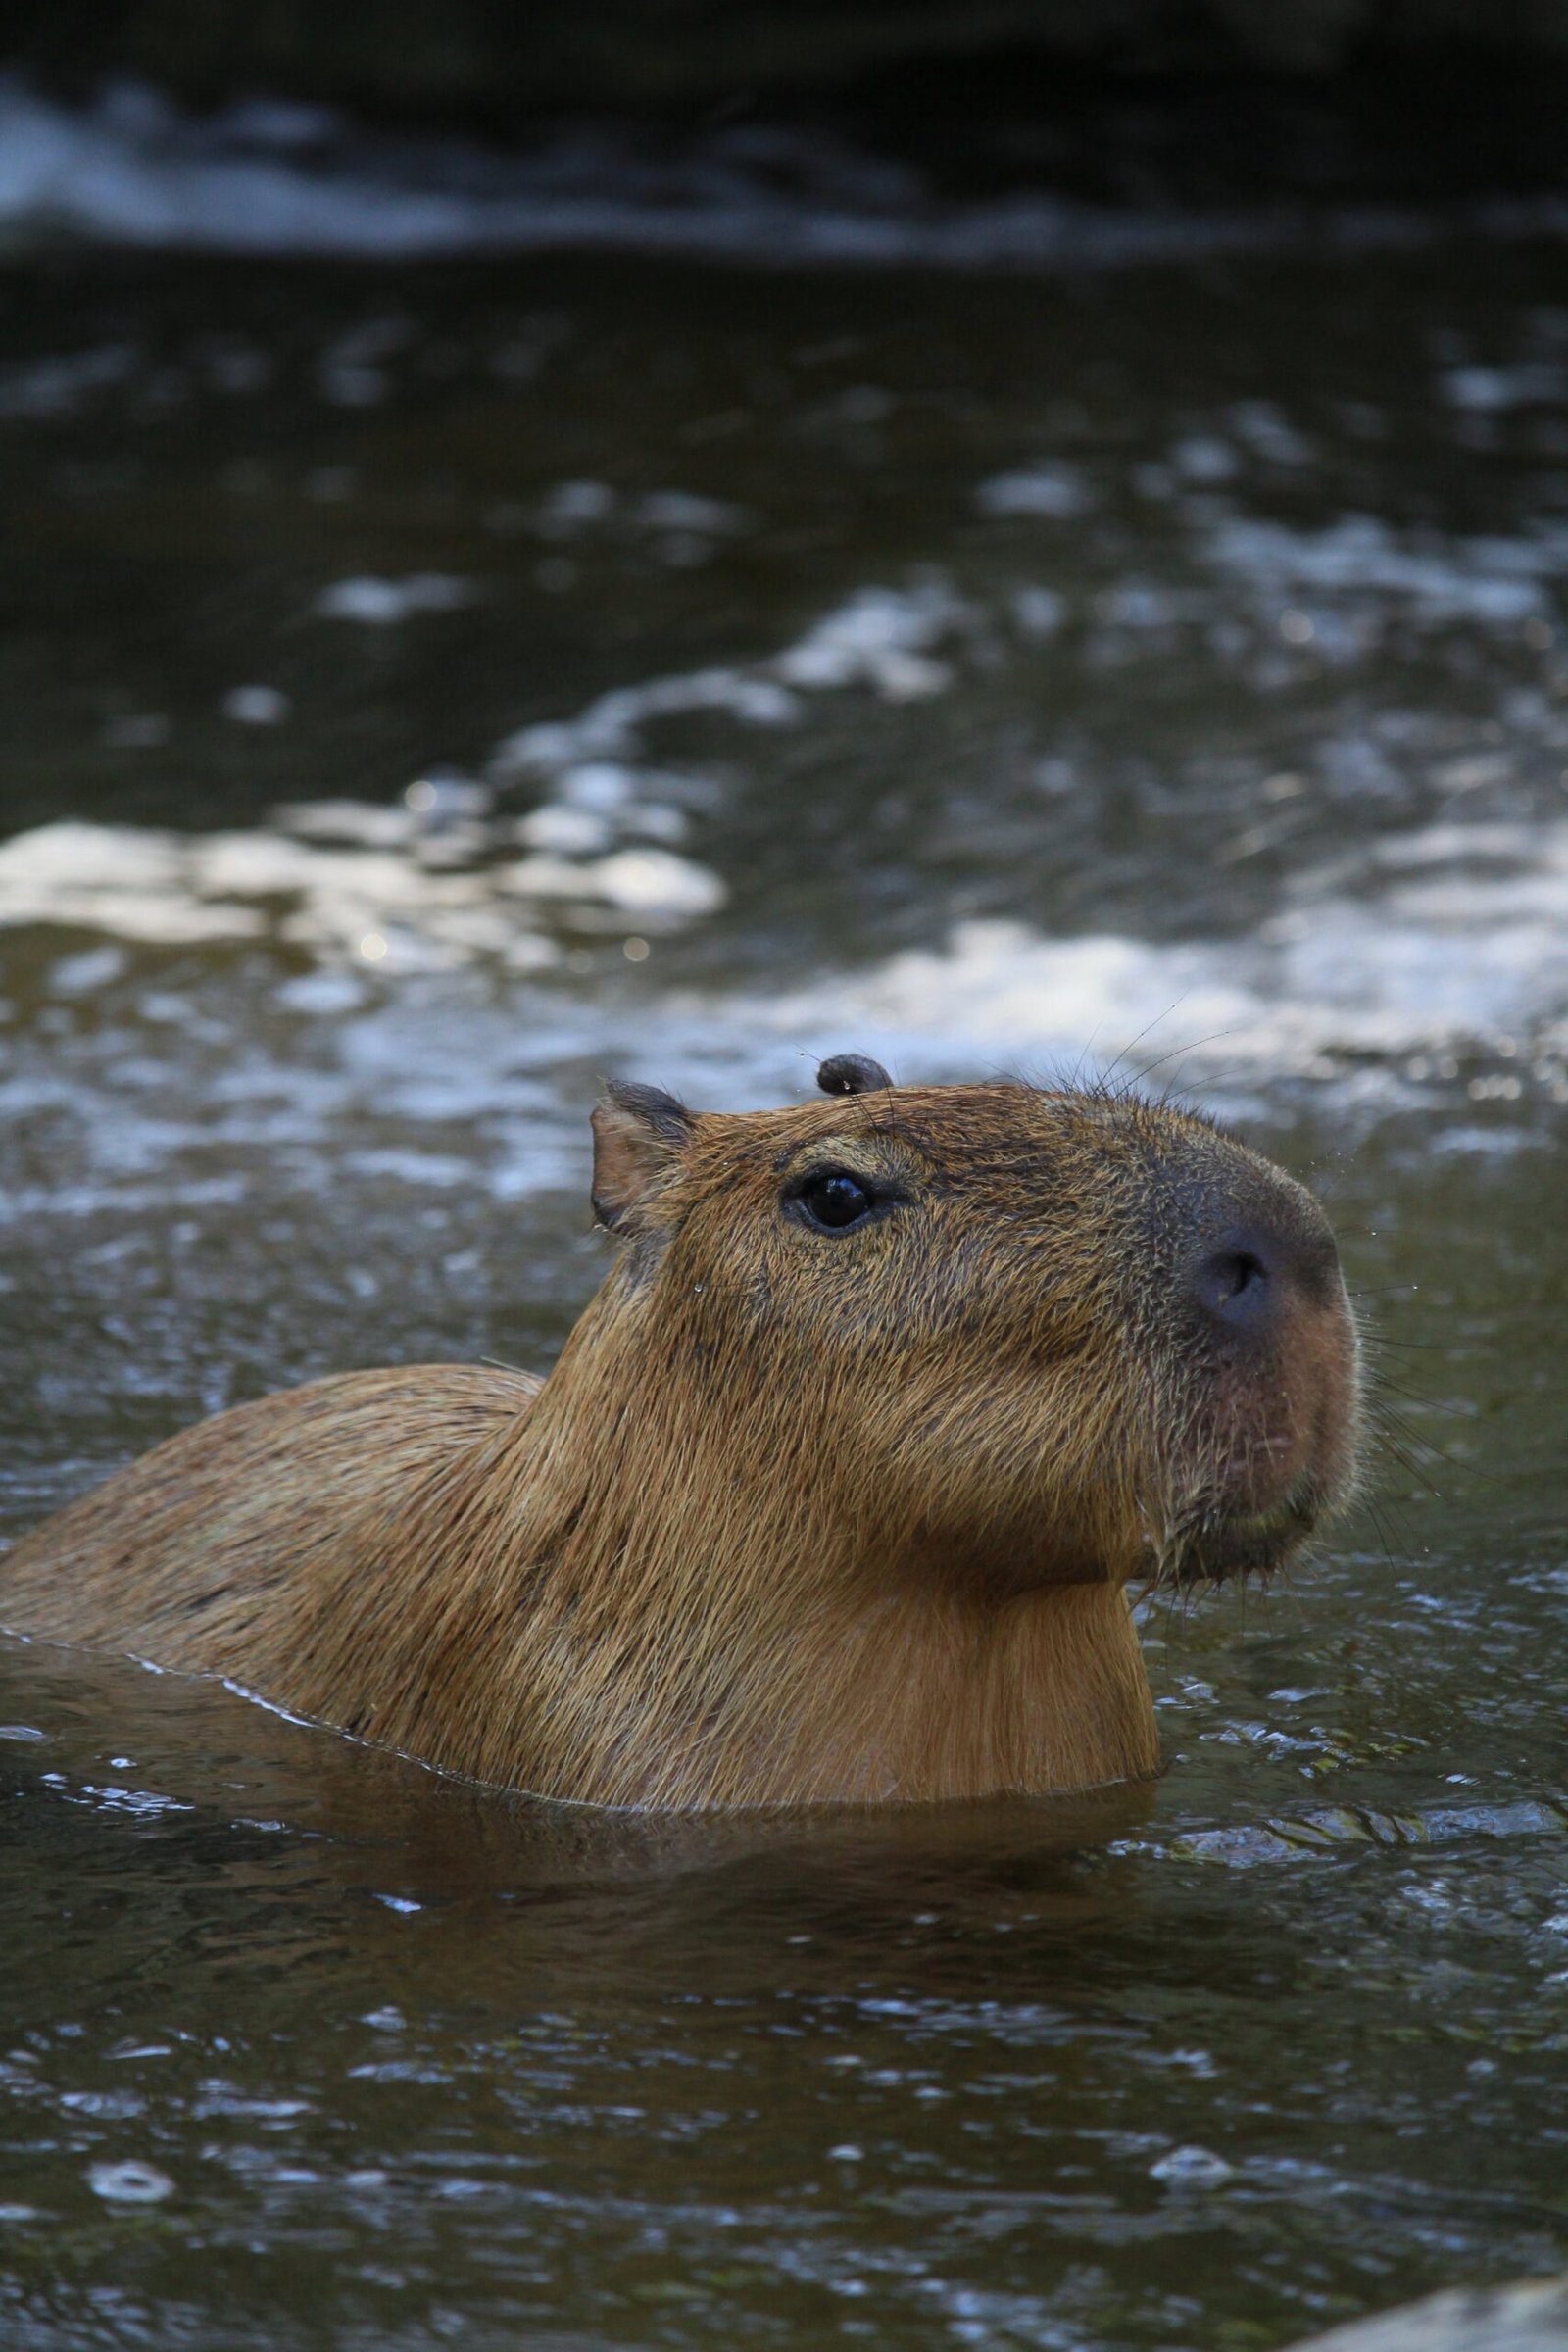 How much do capybaras cost?